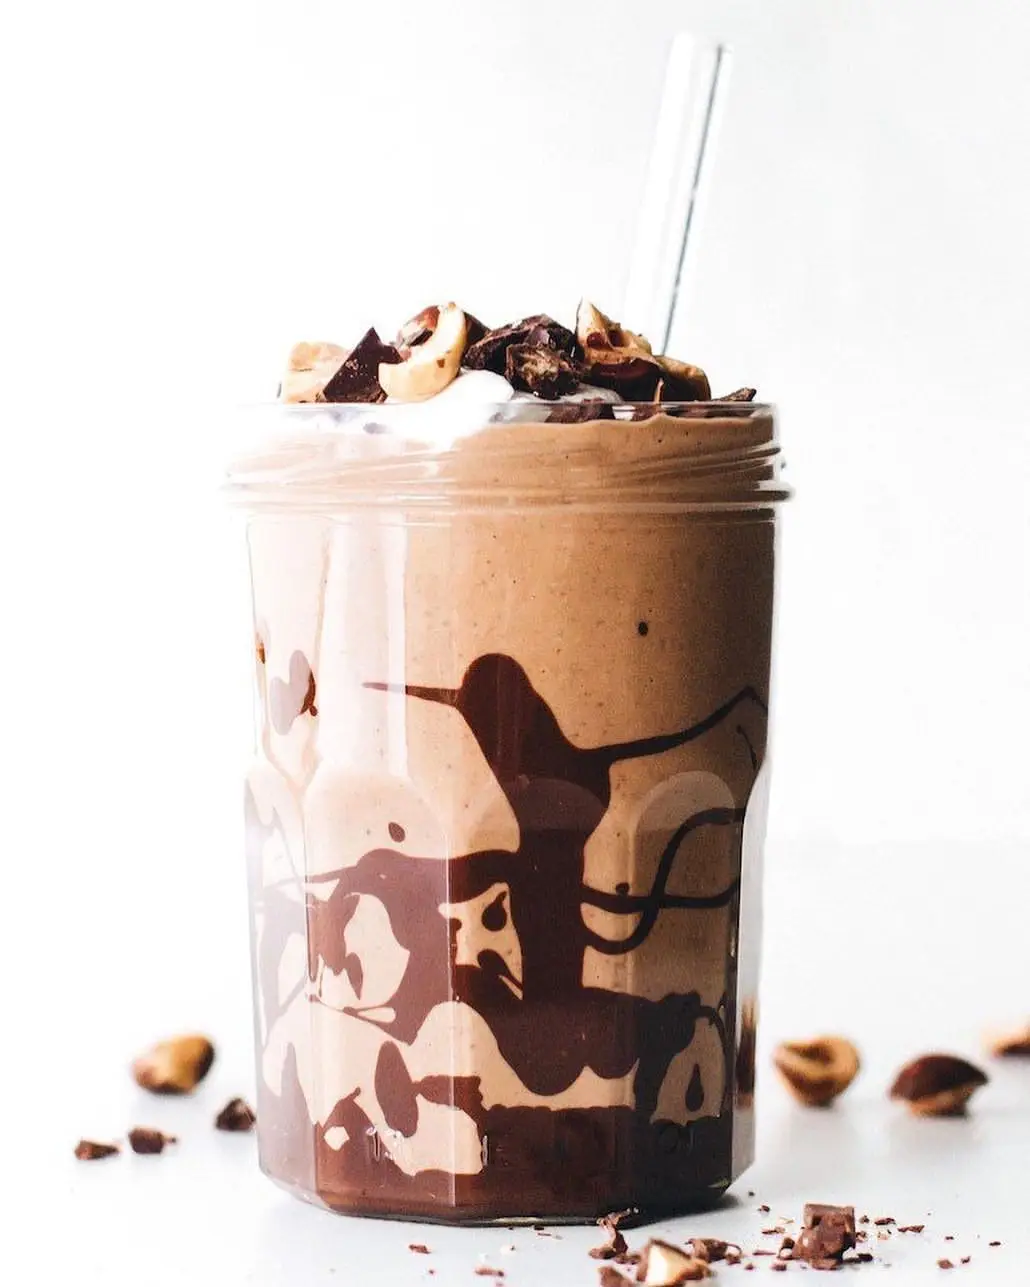 Marvelous Milkshakes That Will Bring All the Boys to the Yard ...